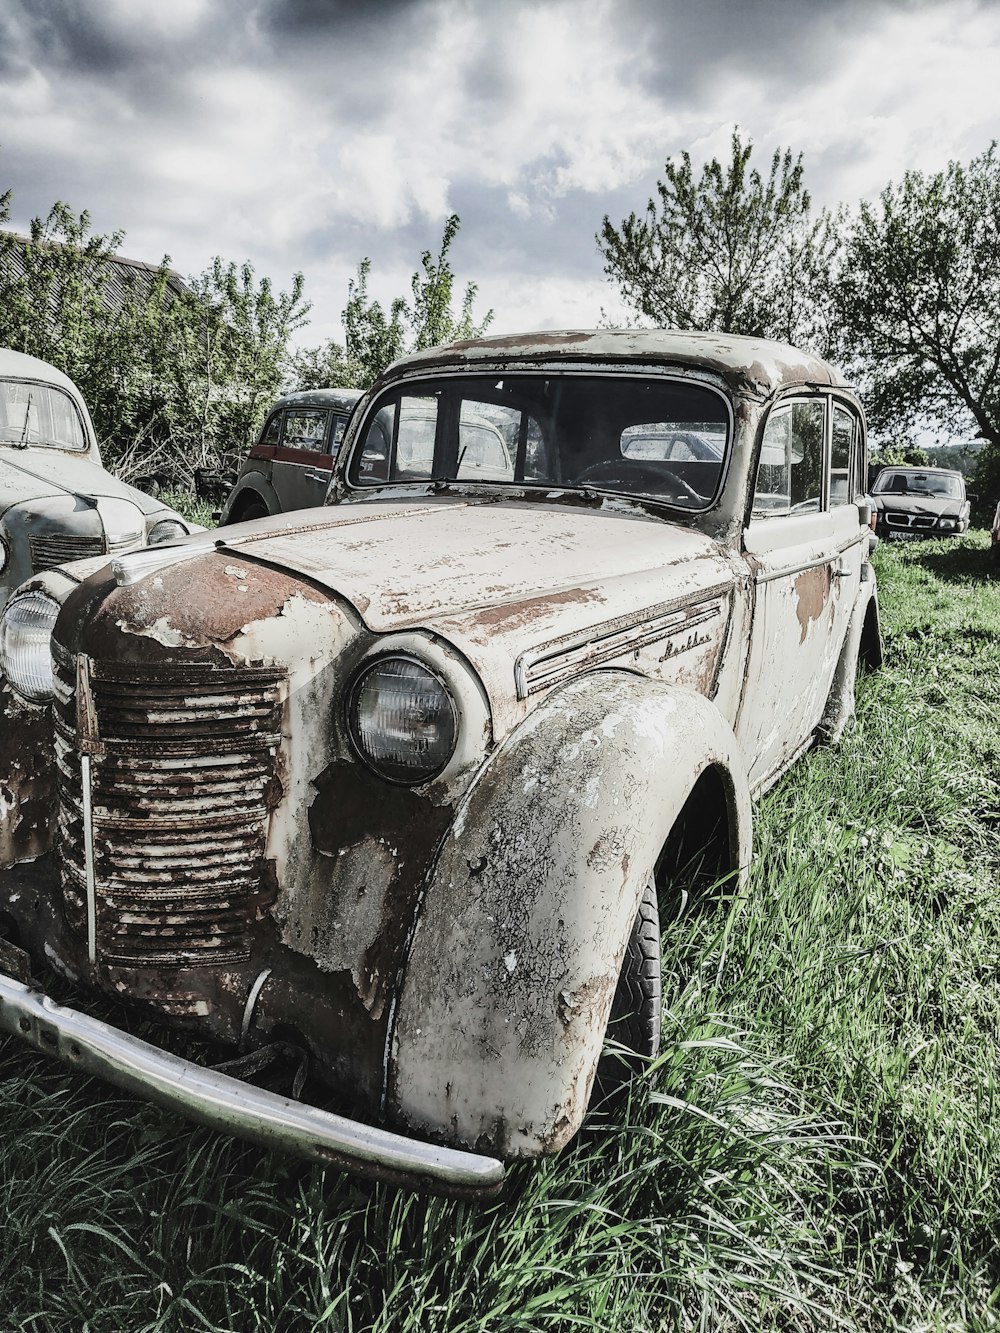 an old rusty car is sitting in the grass